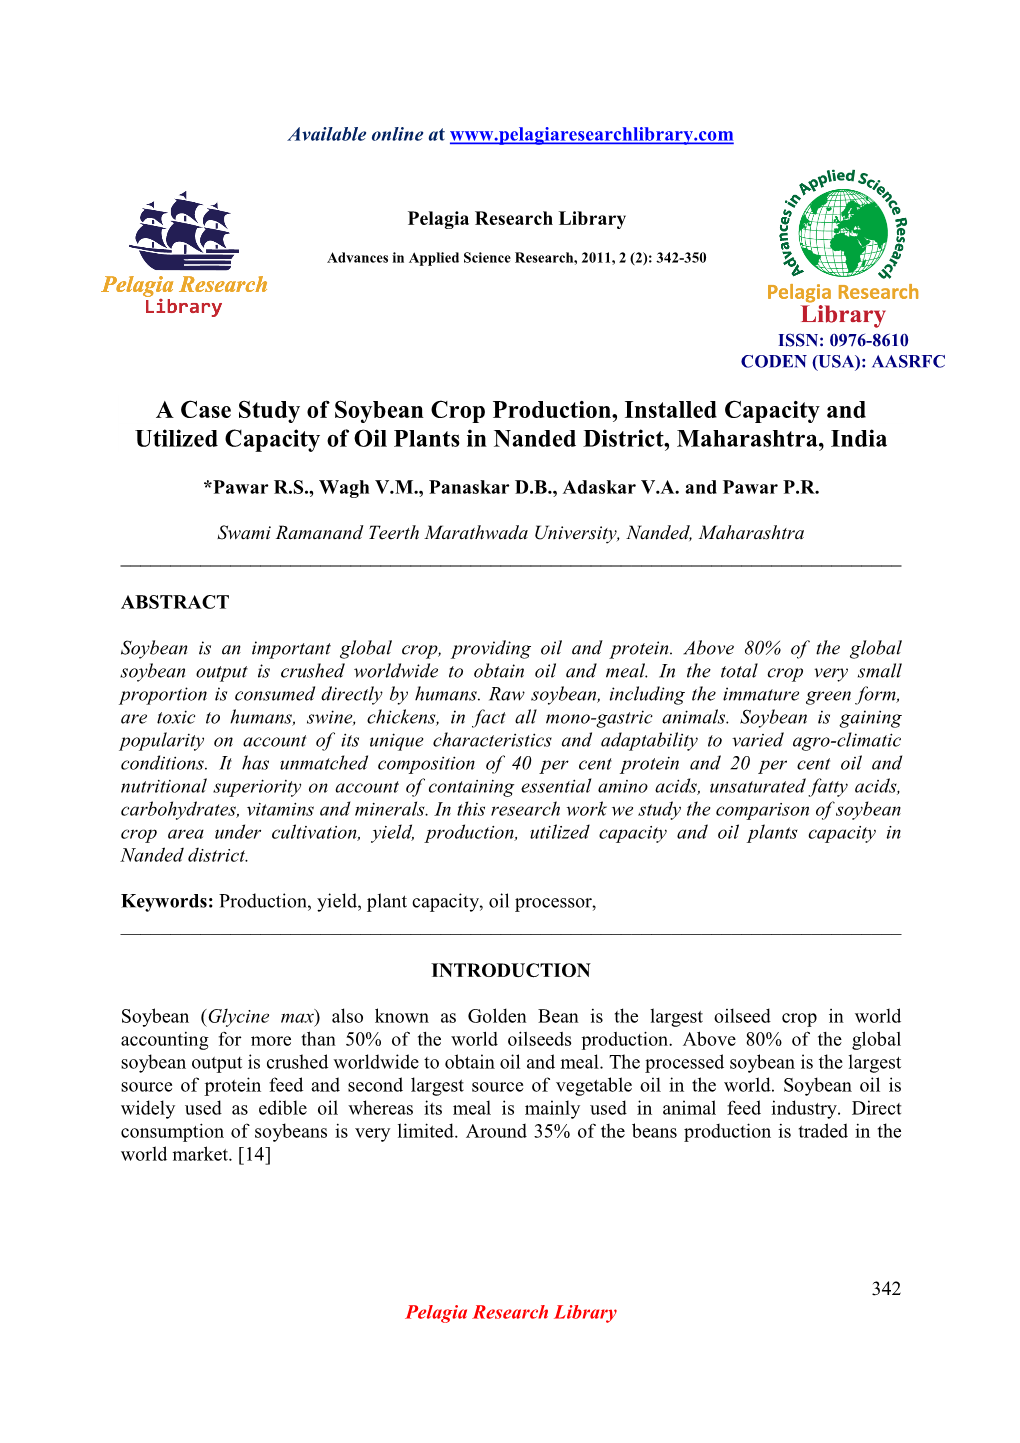 A Case Study of Soybean Crop Production, Installed Capacity and Utilized Capacity of Oil Plants in Nanded District, Maharashtra, India